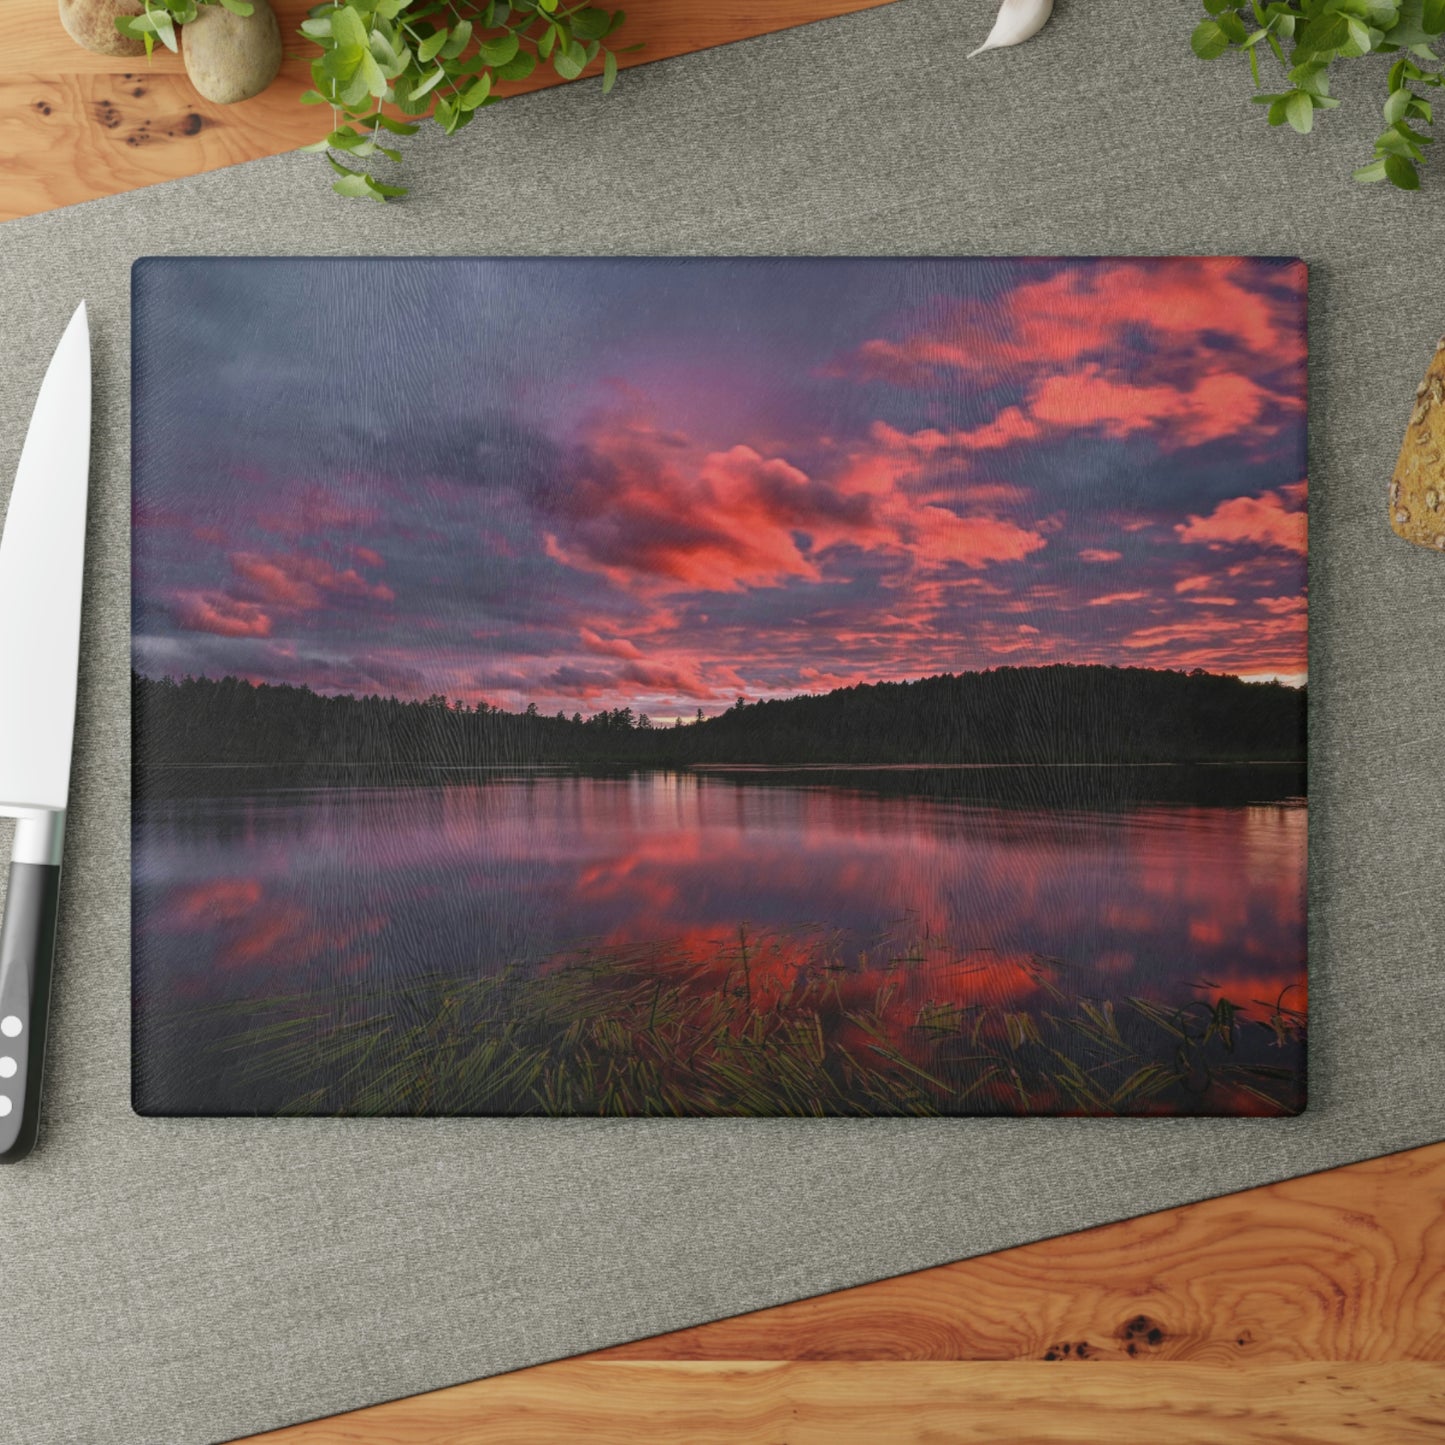 Glass Cutting Board - Reflections of Summer, Colby Lake